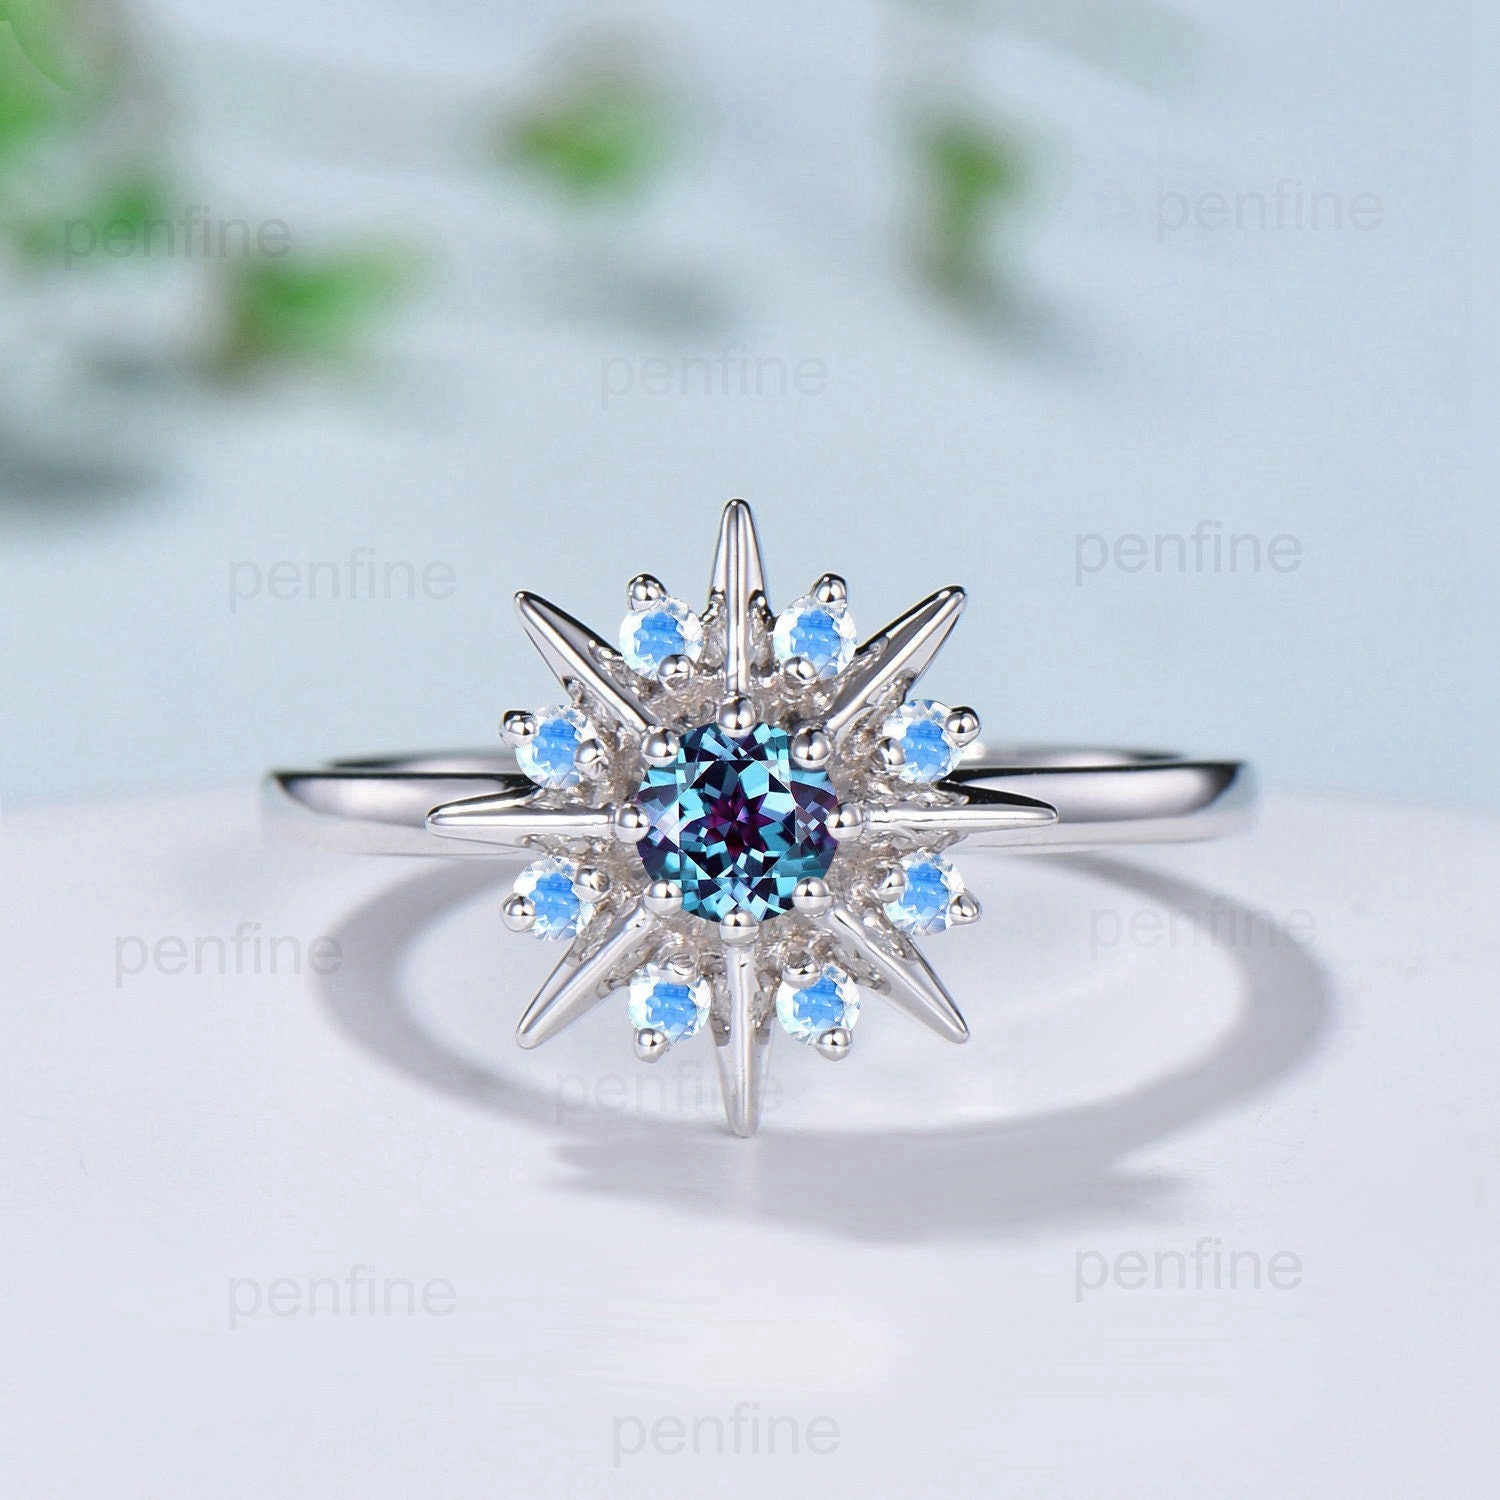 Vintage Galaxy Star Alexandrite Engagement Ring Sunflower White Gold Art Deco Moonstone Stacking Promise Ring Handmade Proposal Gifts Women - PENFINE